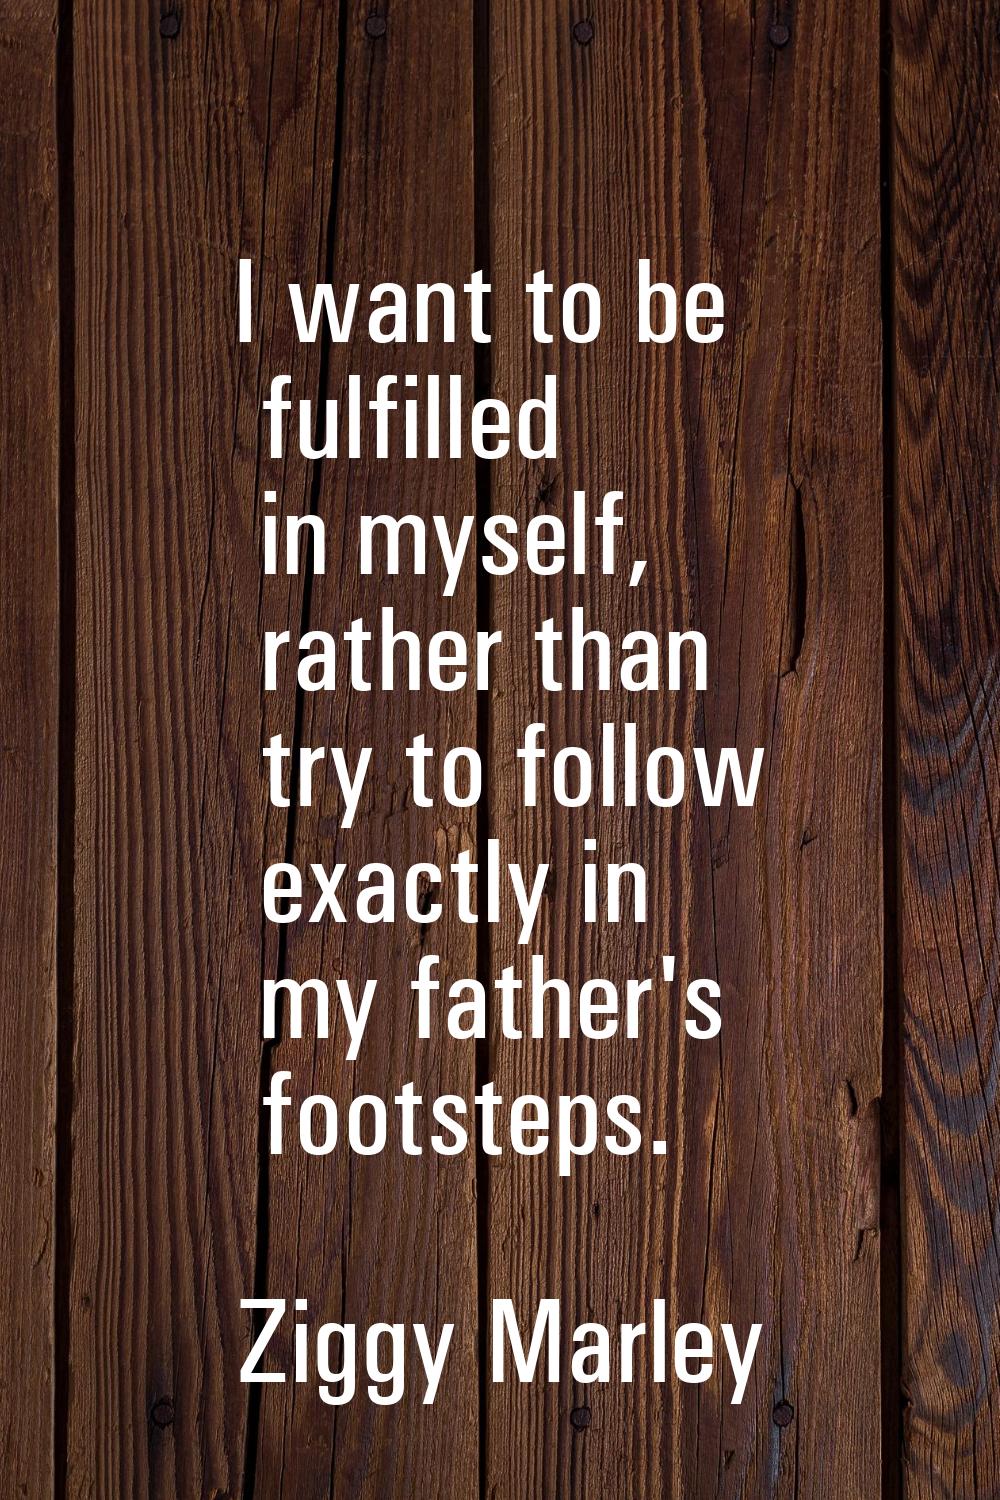 I want to be fulfilled in myself, rather than try to follow exactly in my father's footsteps.